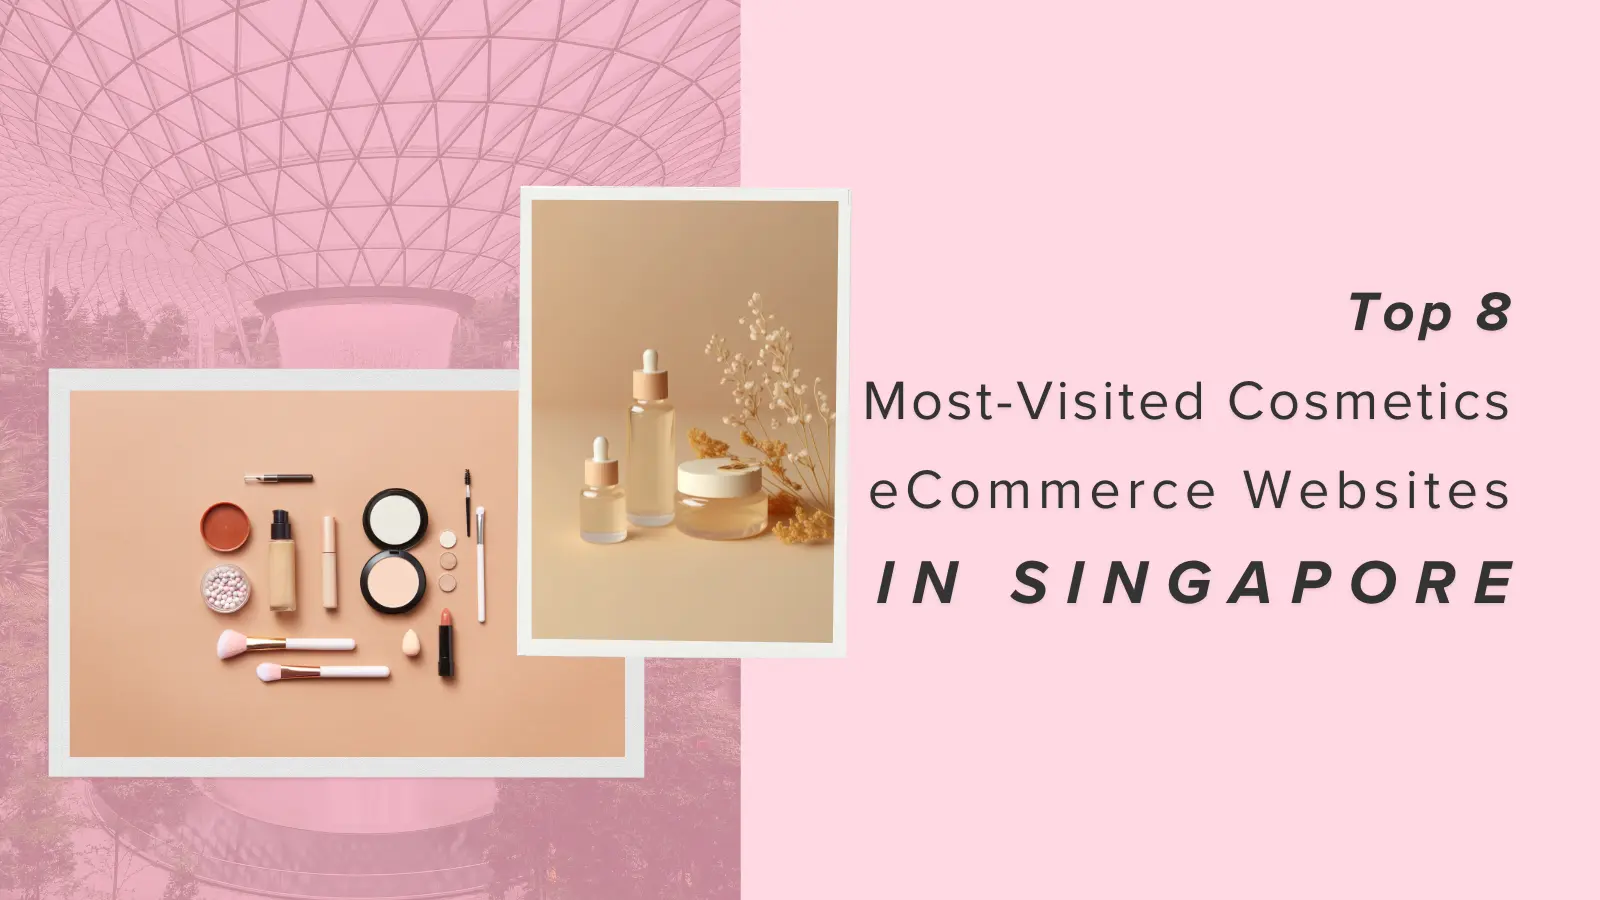 Top 8 Most-Visited Cosmetics eCommerce Websites in Singapore